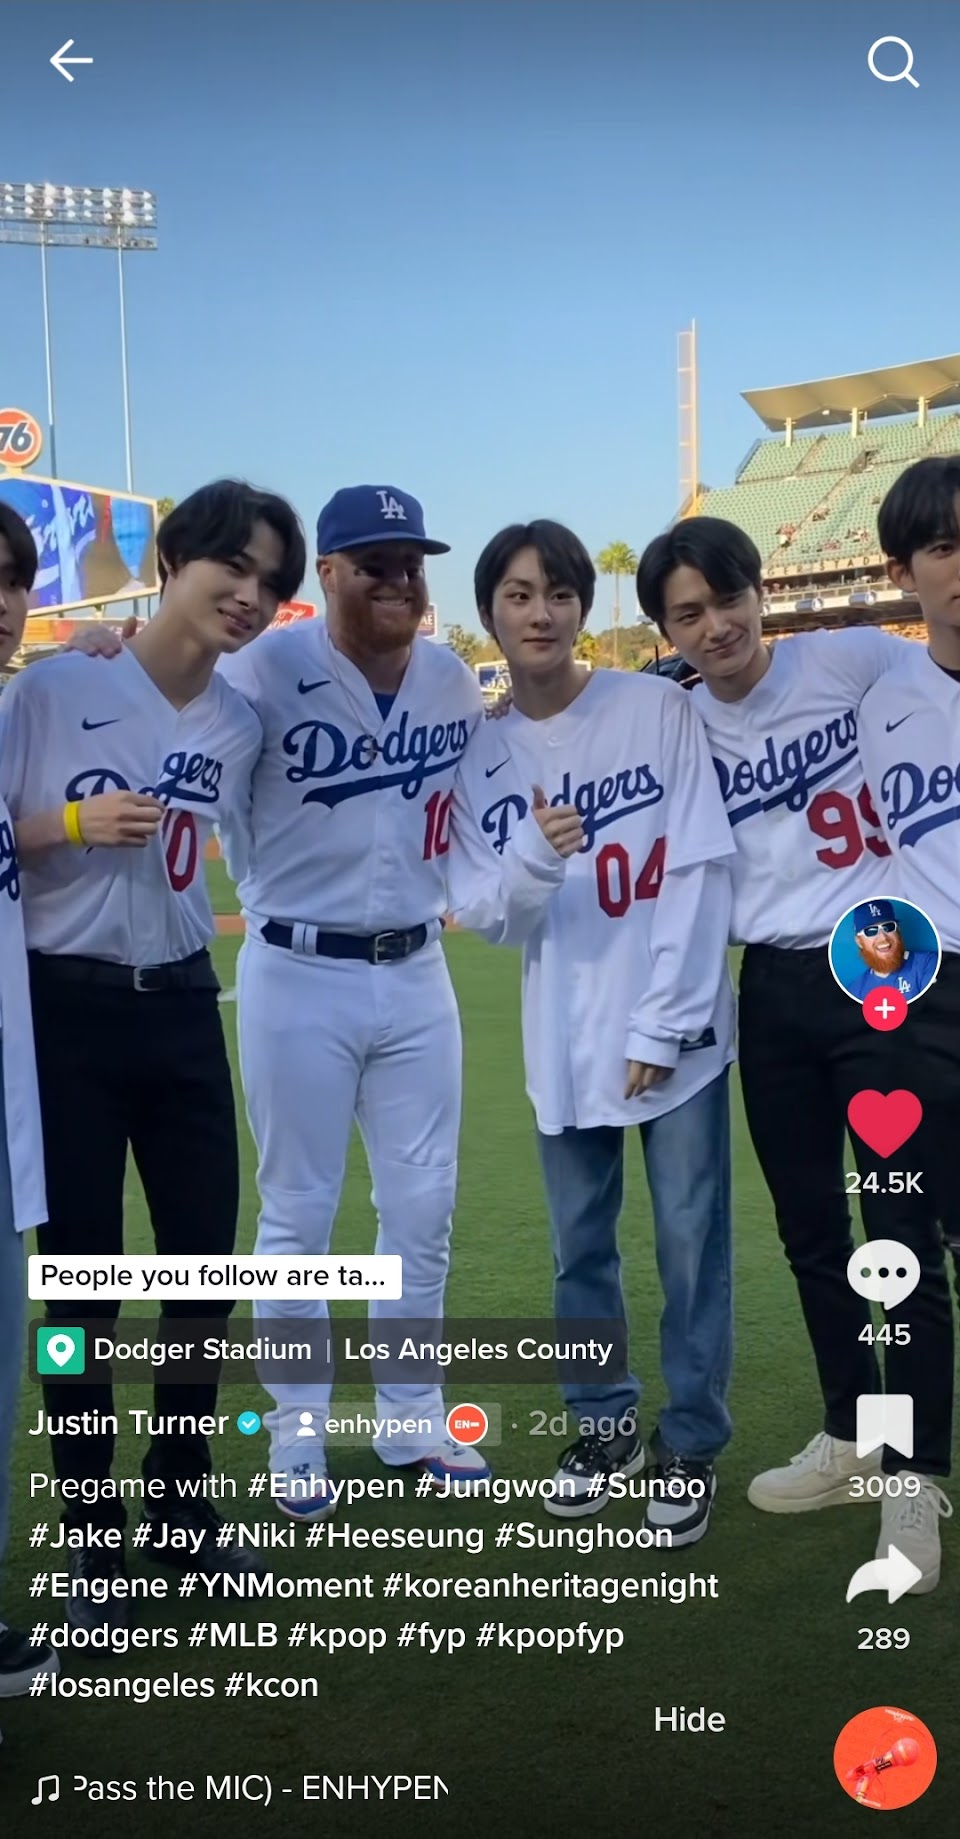 Los Angeles Dodgers' Justin Turner Lives His Y/N Moment With ENHYPEN -  Koreaboo